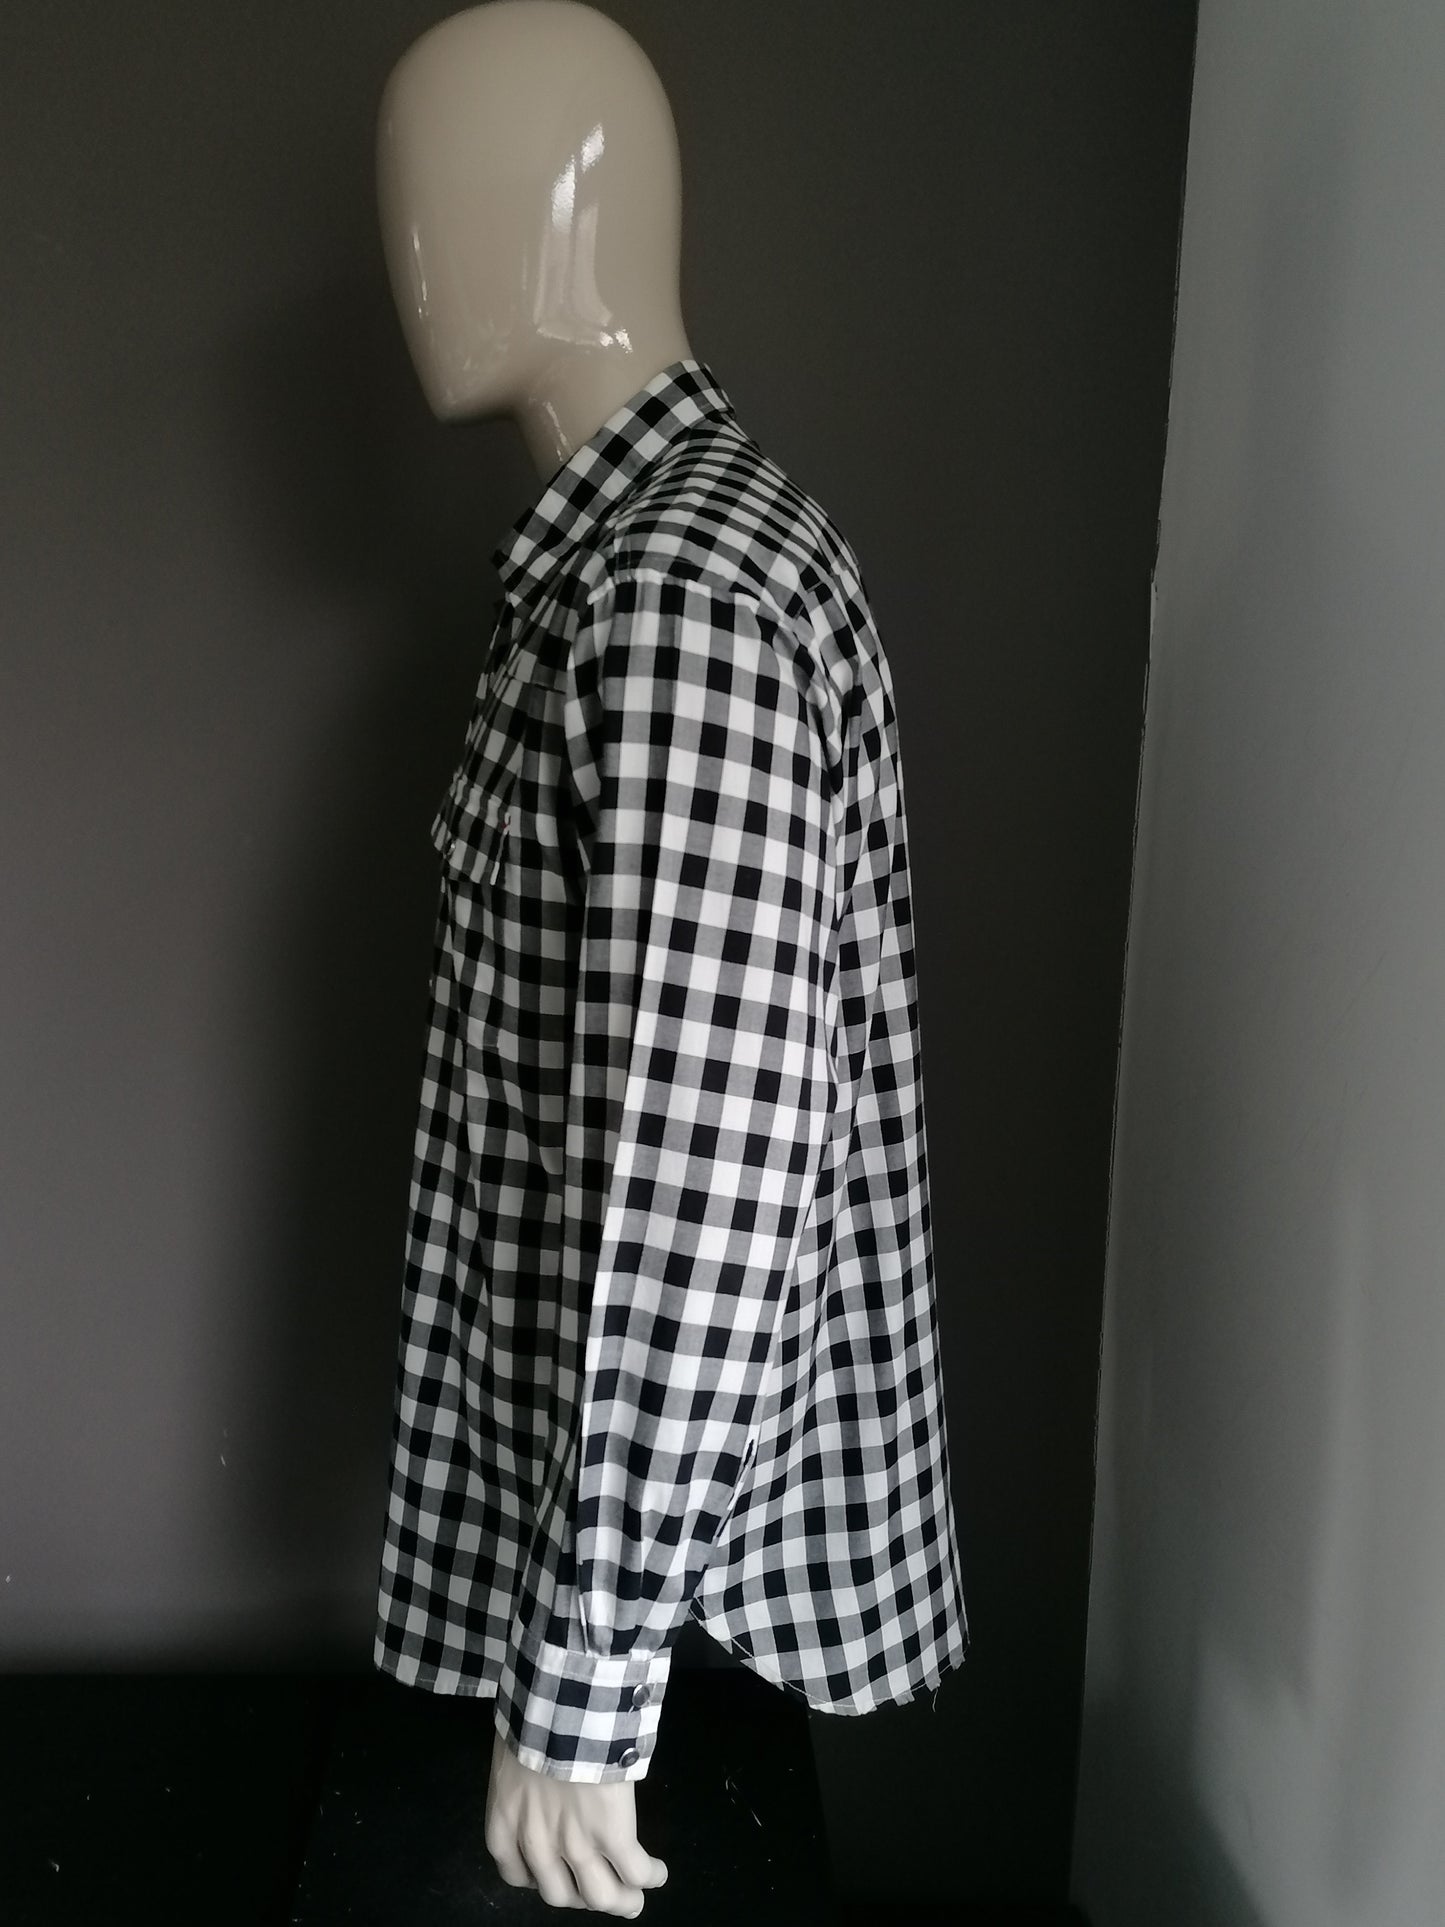 Tommy Hilfiger shirt with press studs. Black white checkered. Size XL.